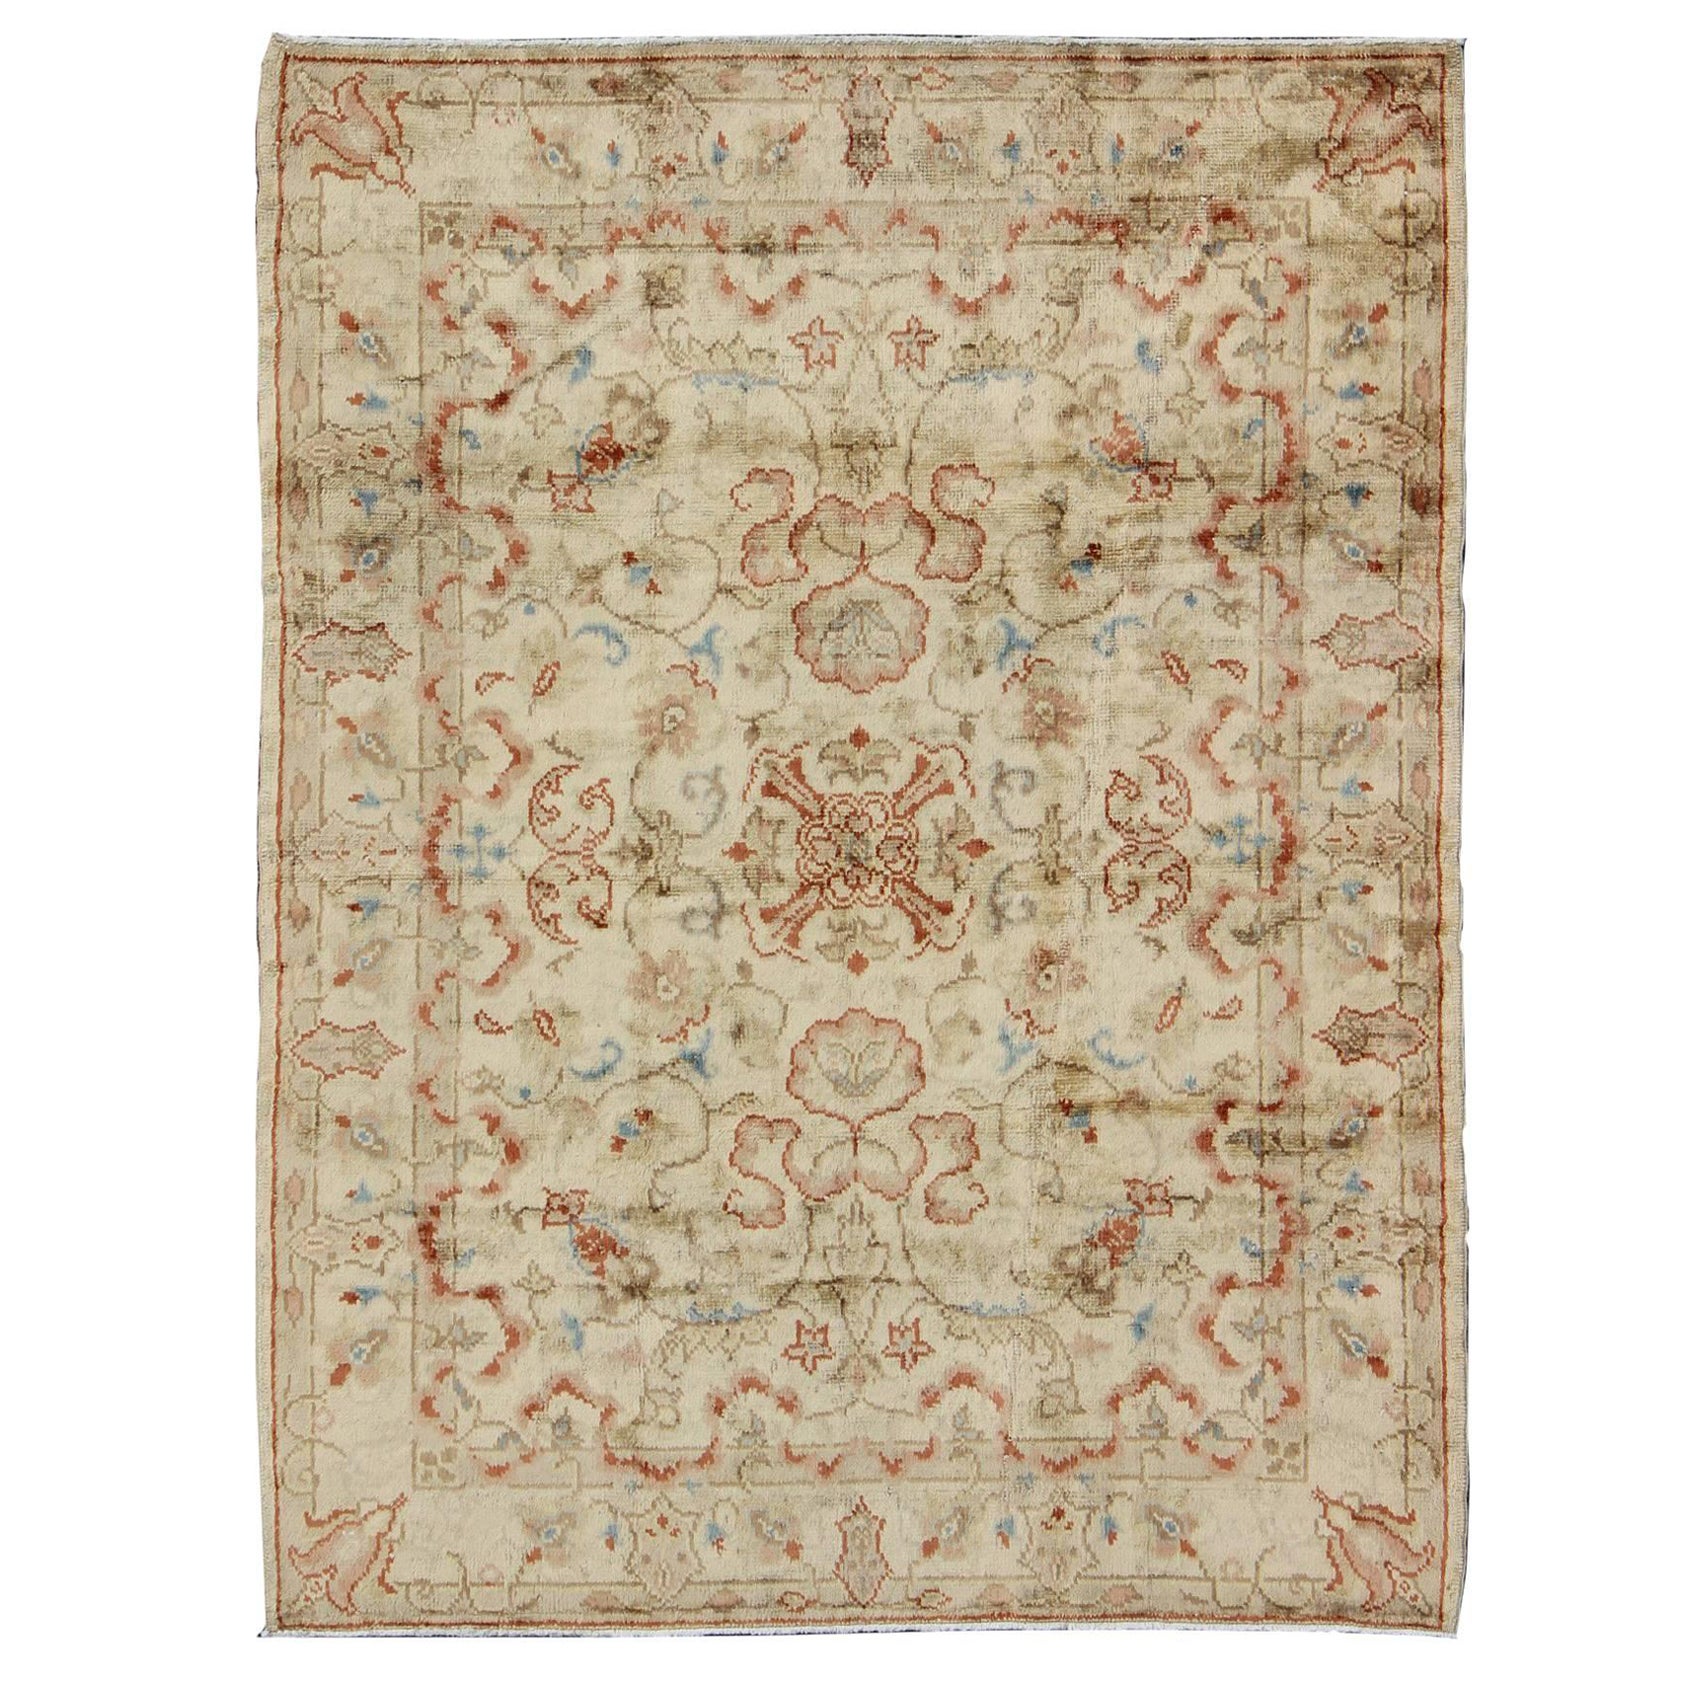 Square Vintage Oushak Rug with All-Over Floral Design in Butter, Red, Lt. Green